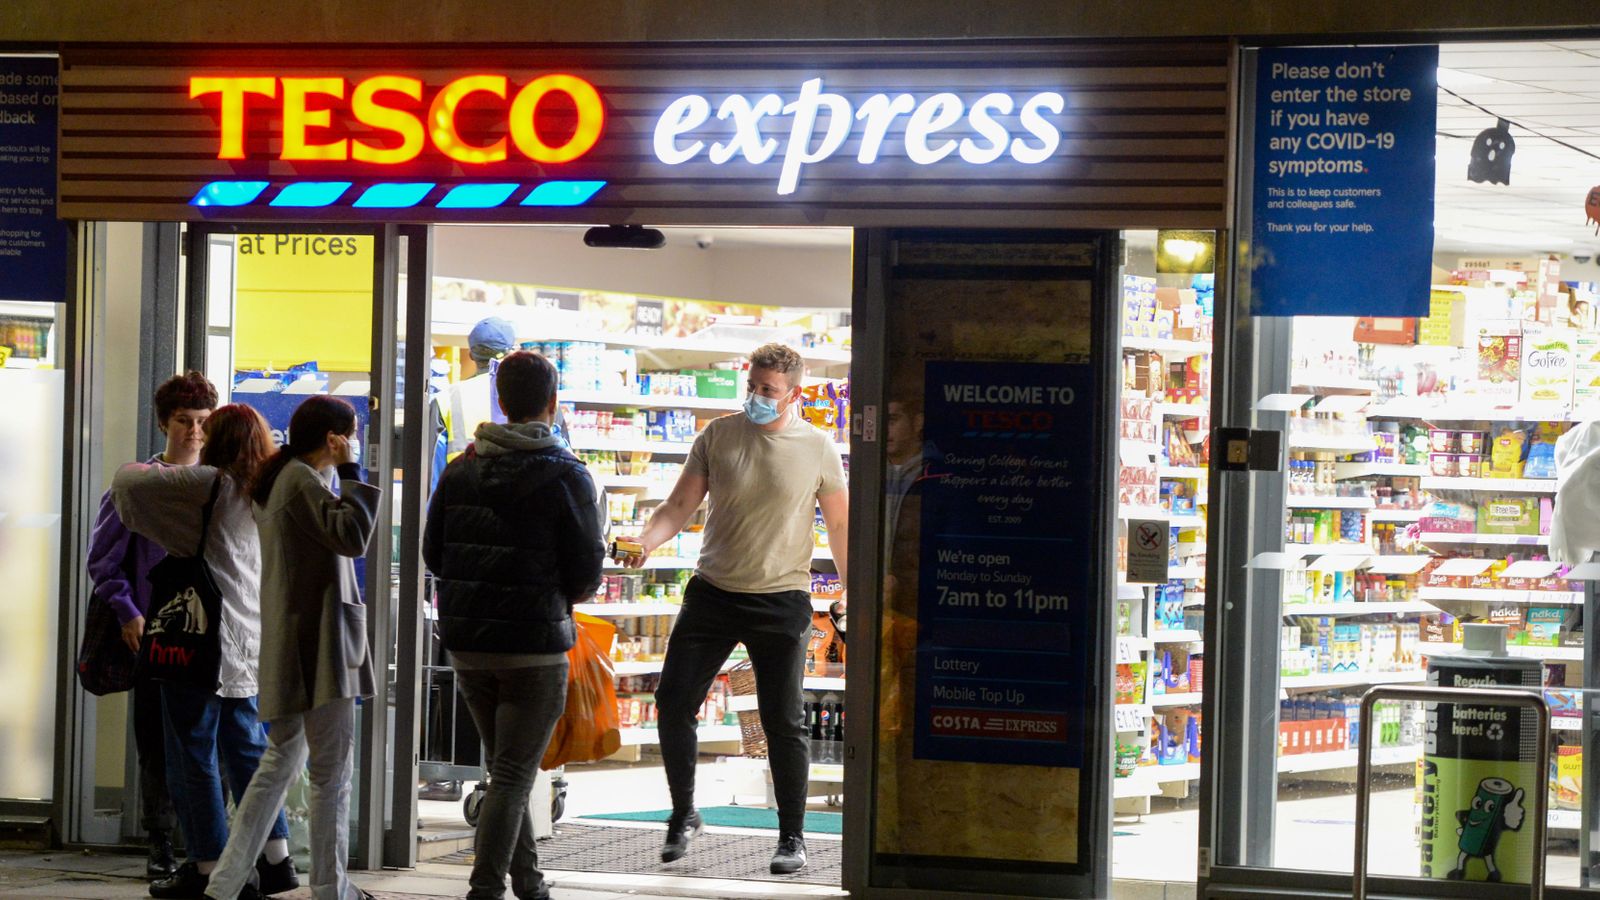 BRISTOL, ENGLAND - OCTOBER 12: People are seen at Tesco Express on October 12, 2020 in Bristol, England. Despite the coronavirus infection rate in the city jumping from 44.2 new cases per 100,000 to 95.4 in the week ending Thursday, October 8, Bristol has been graded as medium or "Tier 1" in the government's new three-tier Covid-19 alert system. Tier 1 means that the rule of six should be observed and that there is a 10 p.m. curfew on pubs and restaurants.  (Photo by Finnbarr Webster/Getty Images)